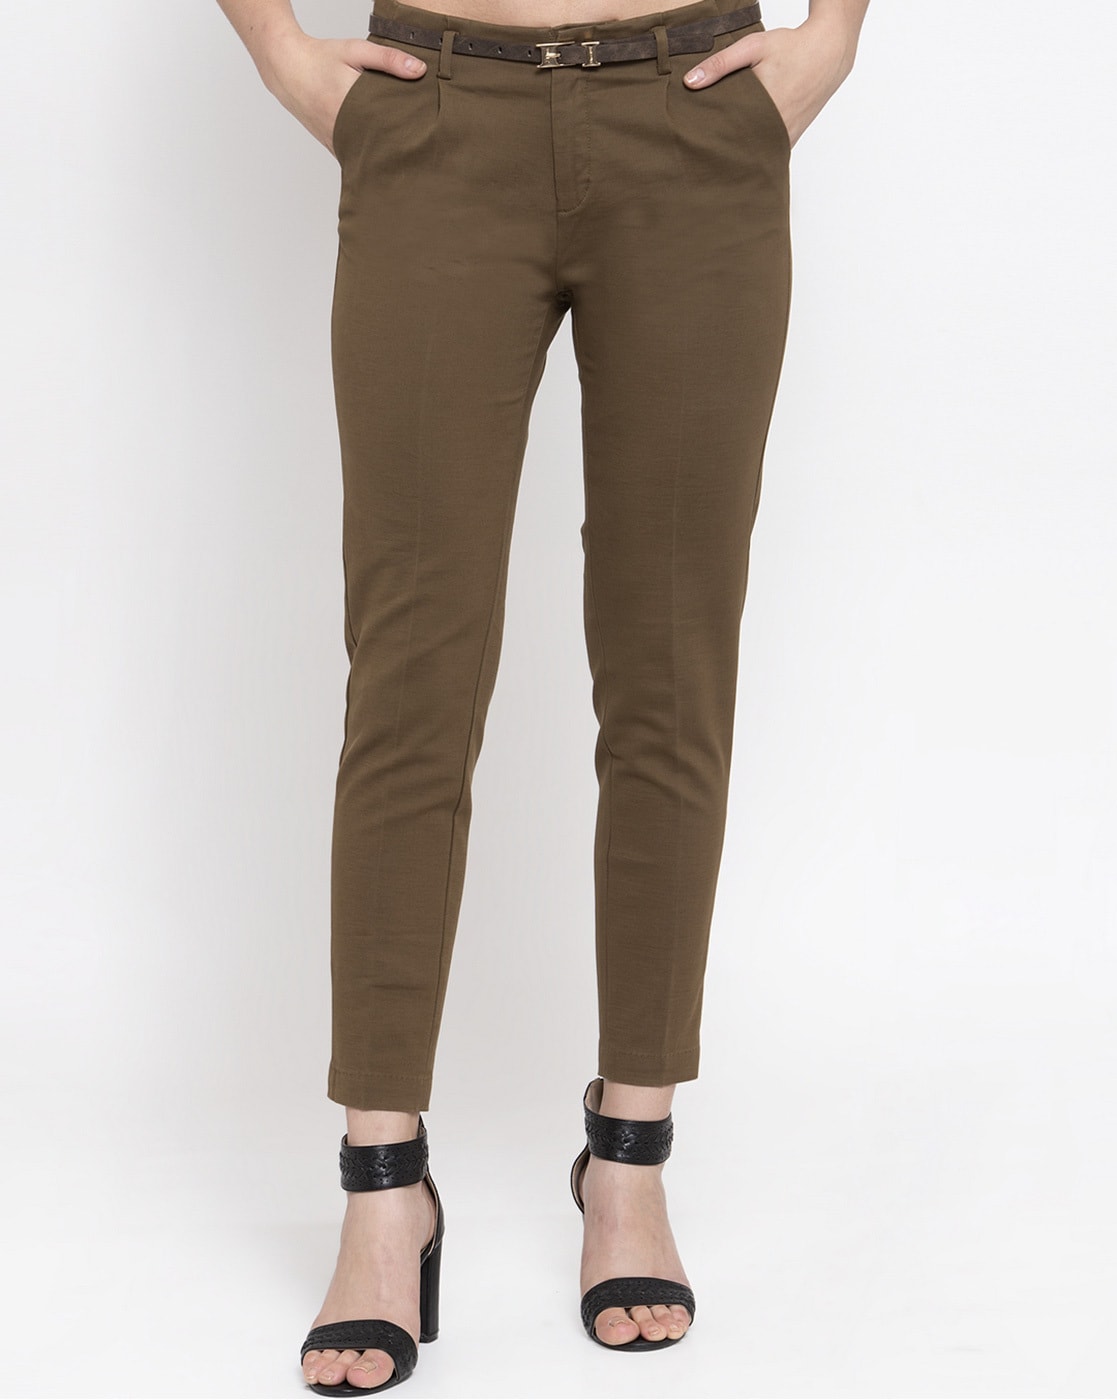 Cargo Trousers & Pants in the color blue for Men on sale | FASHIOLA INDIA